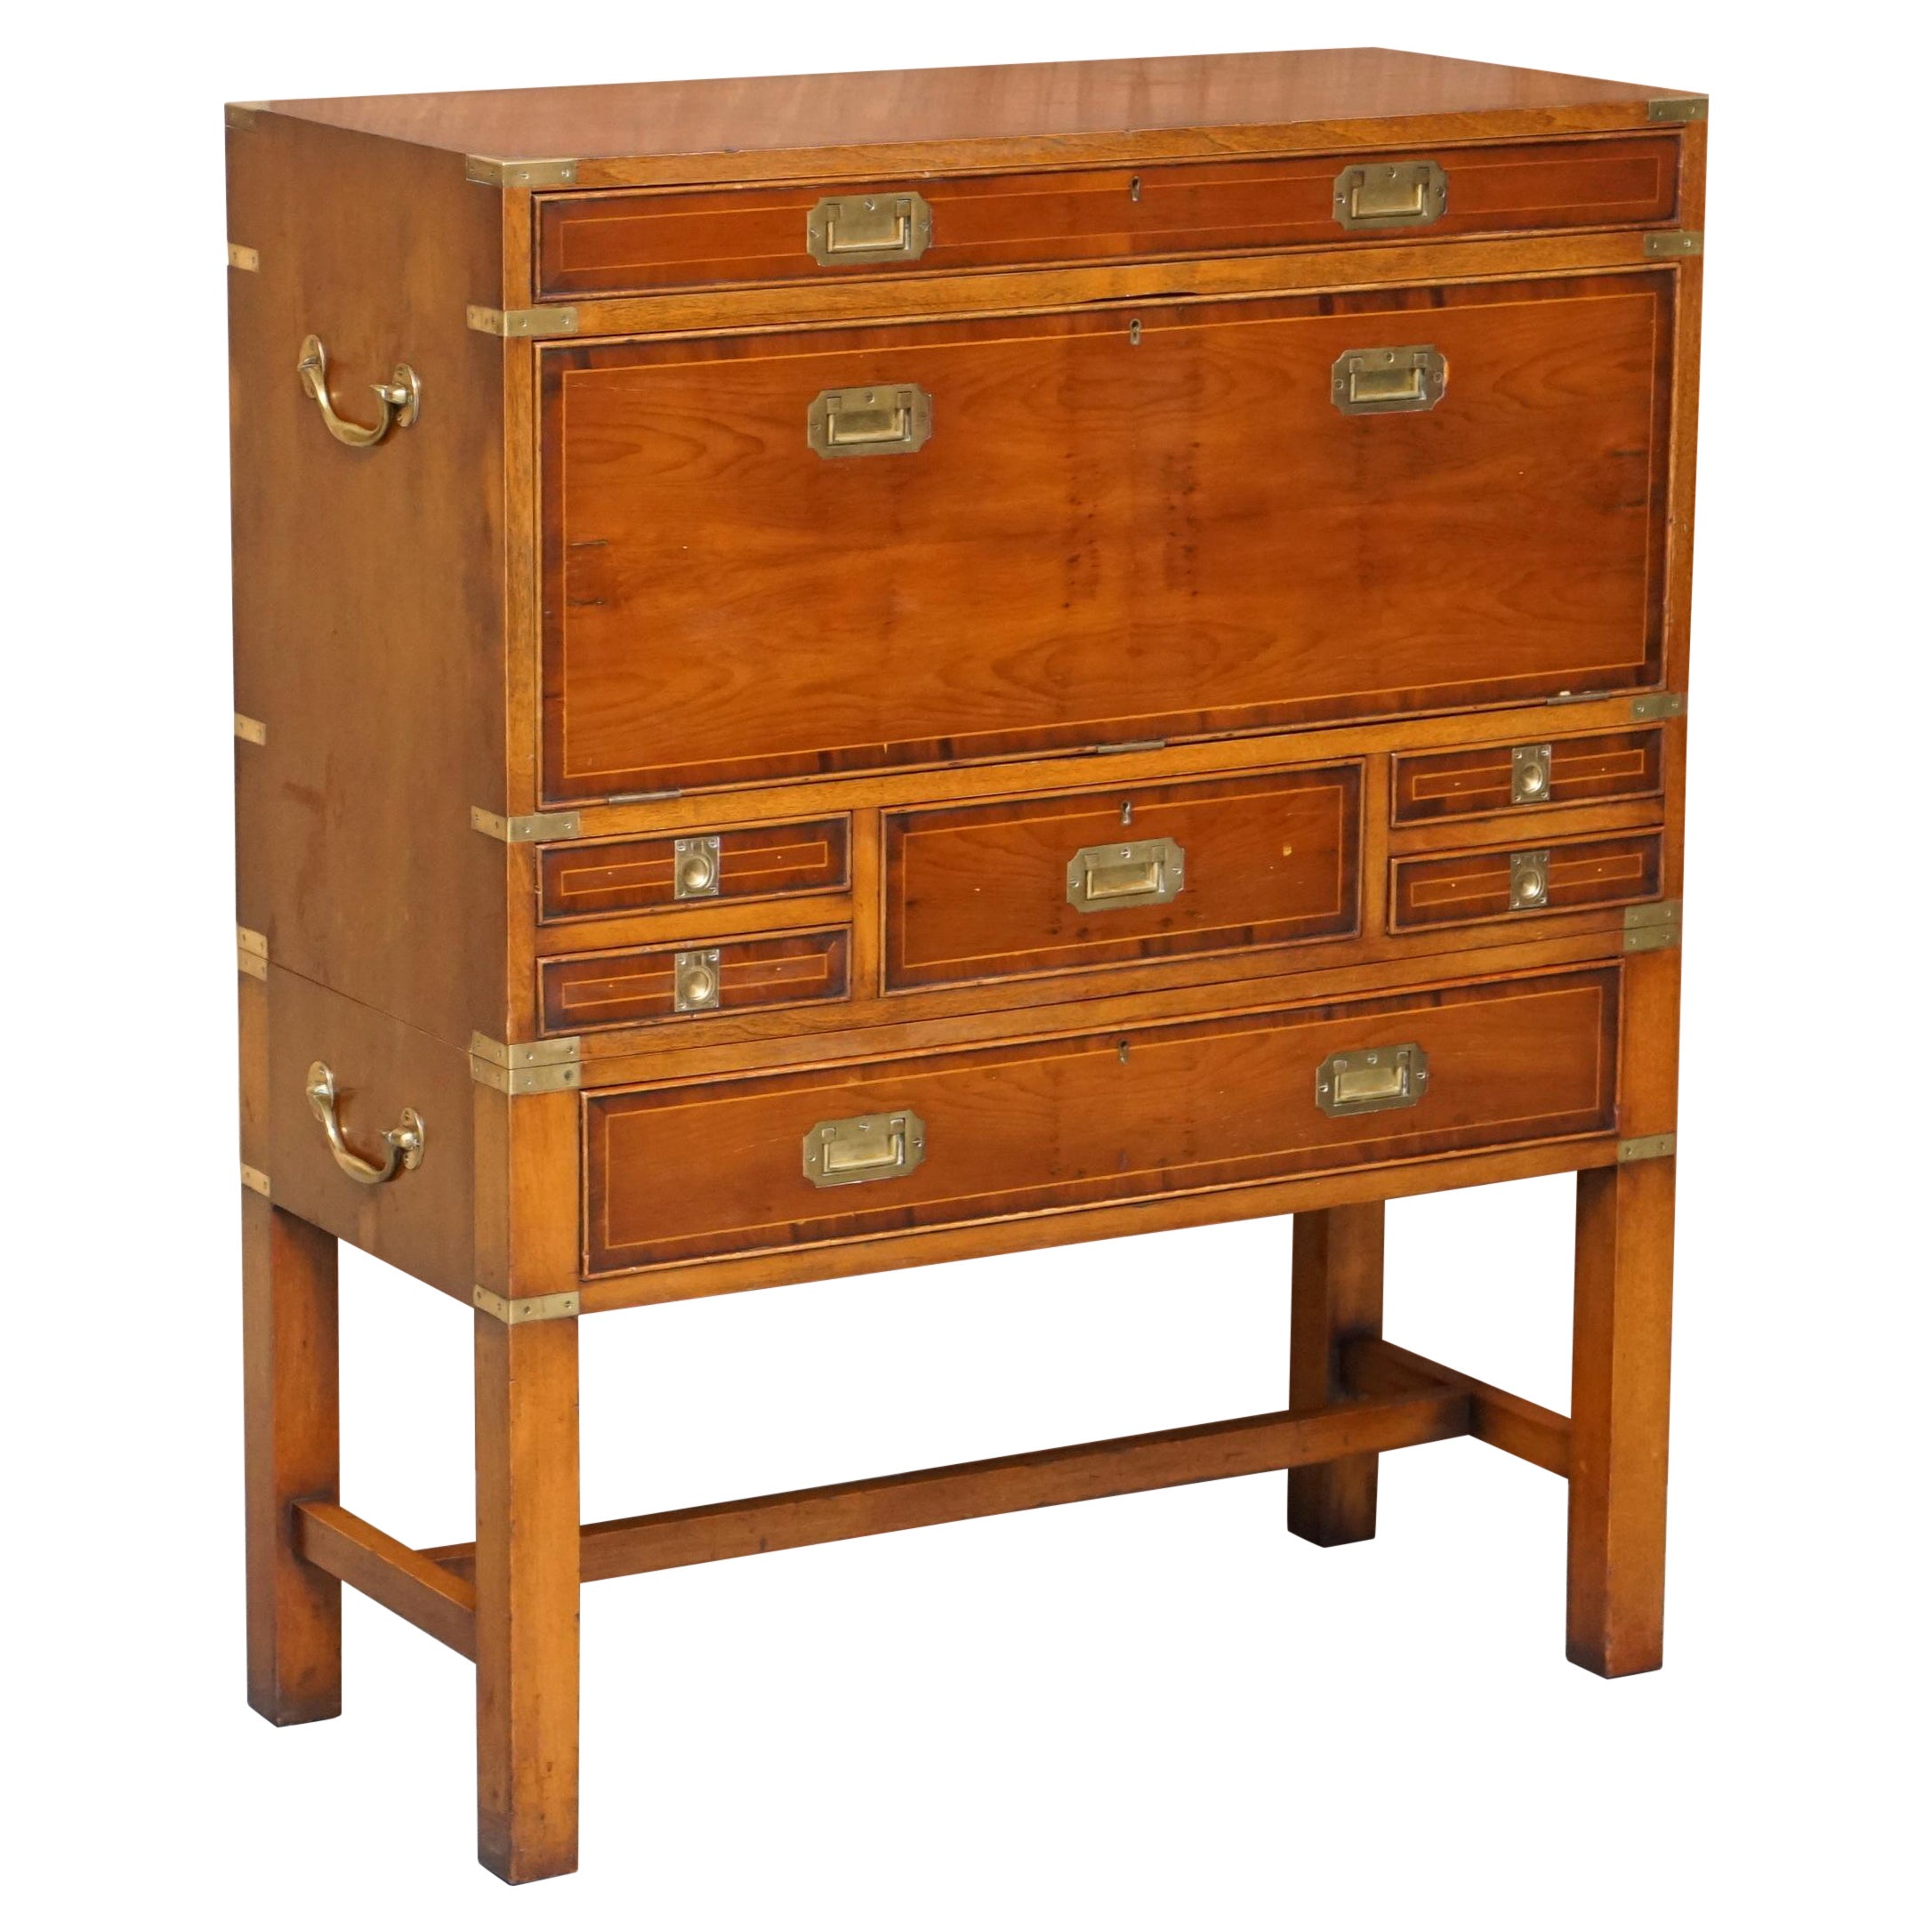 Burr Yew Wood Military Campaign Chest on Stand Bureau Desk with Chest of Drawers